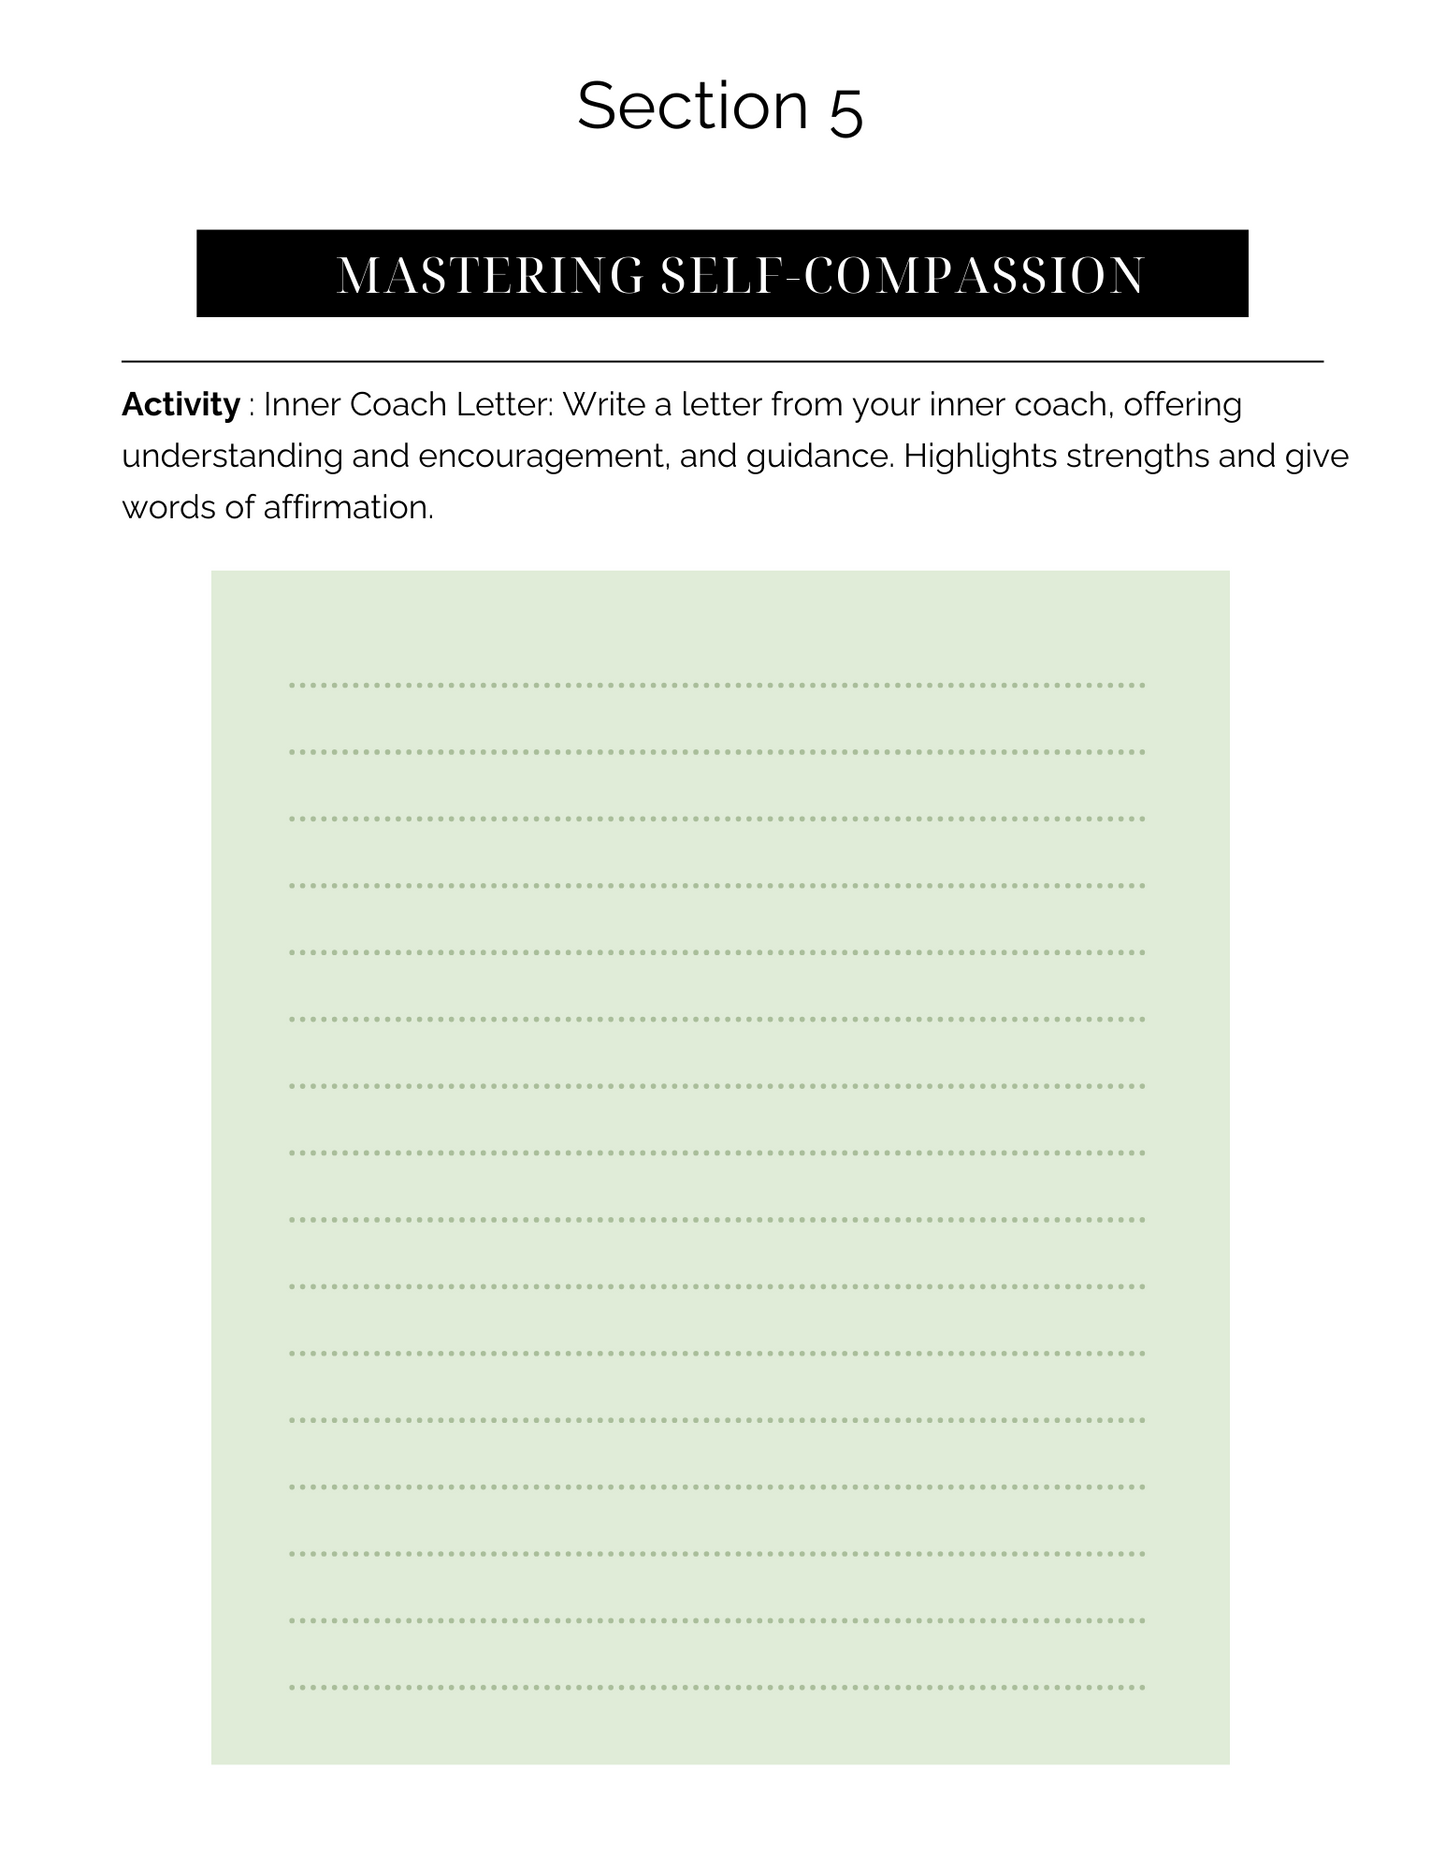 Self-Love Workbook: Cultivating Self-Love for Deeper Connection & Growth